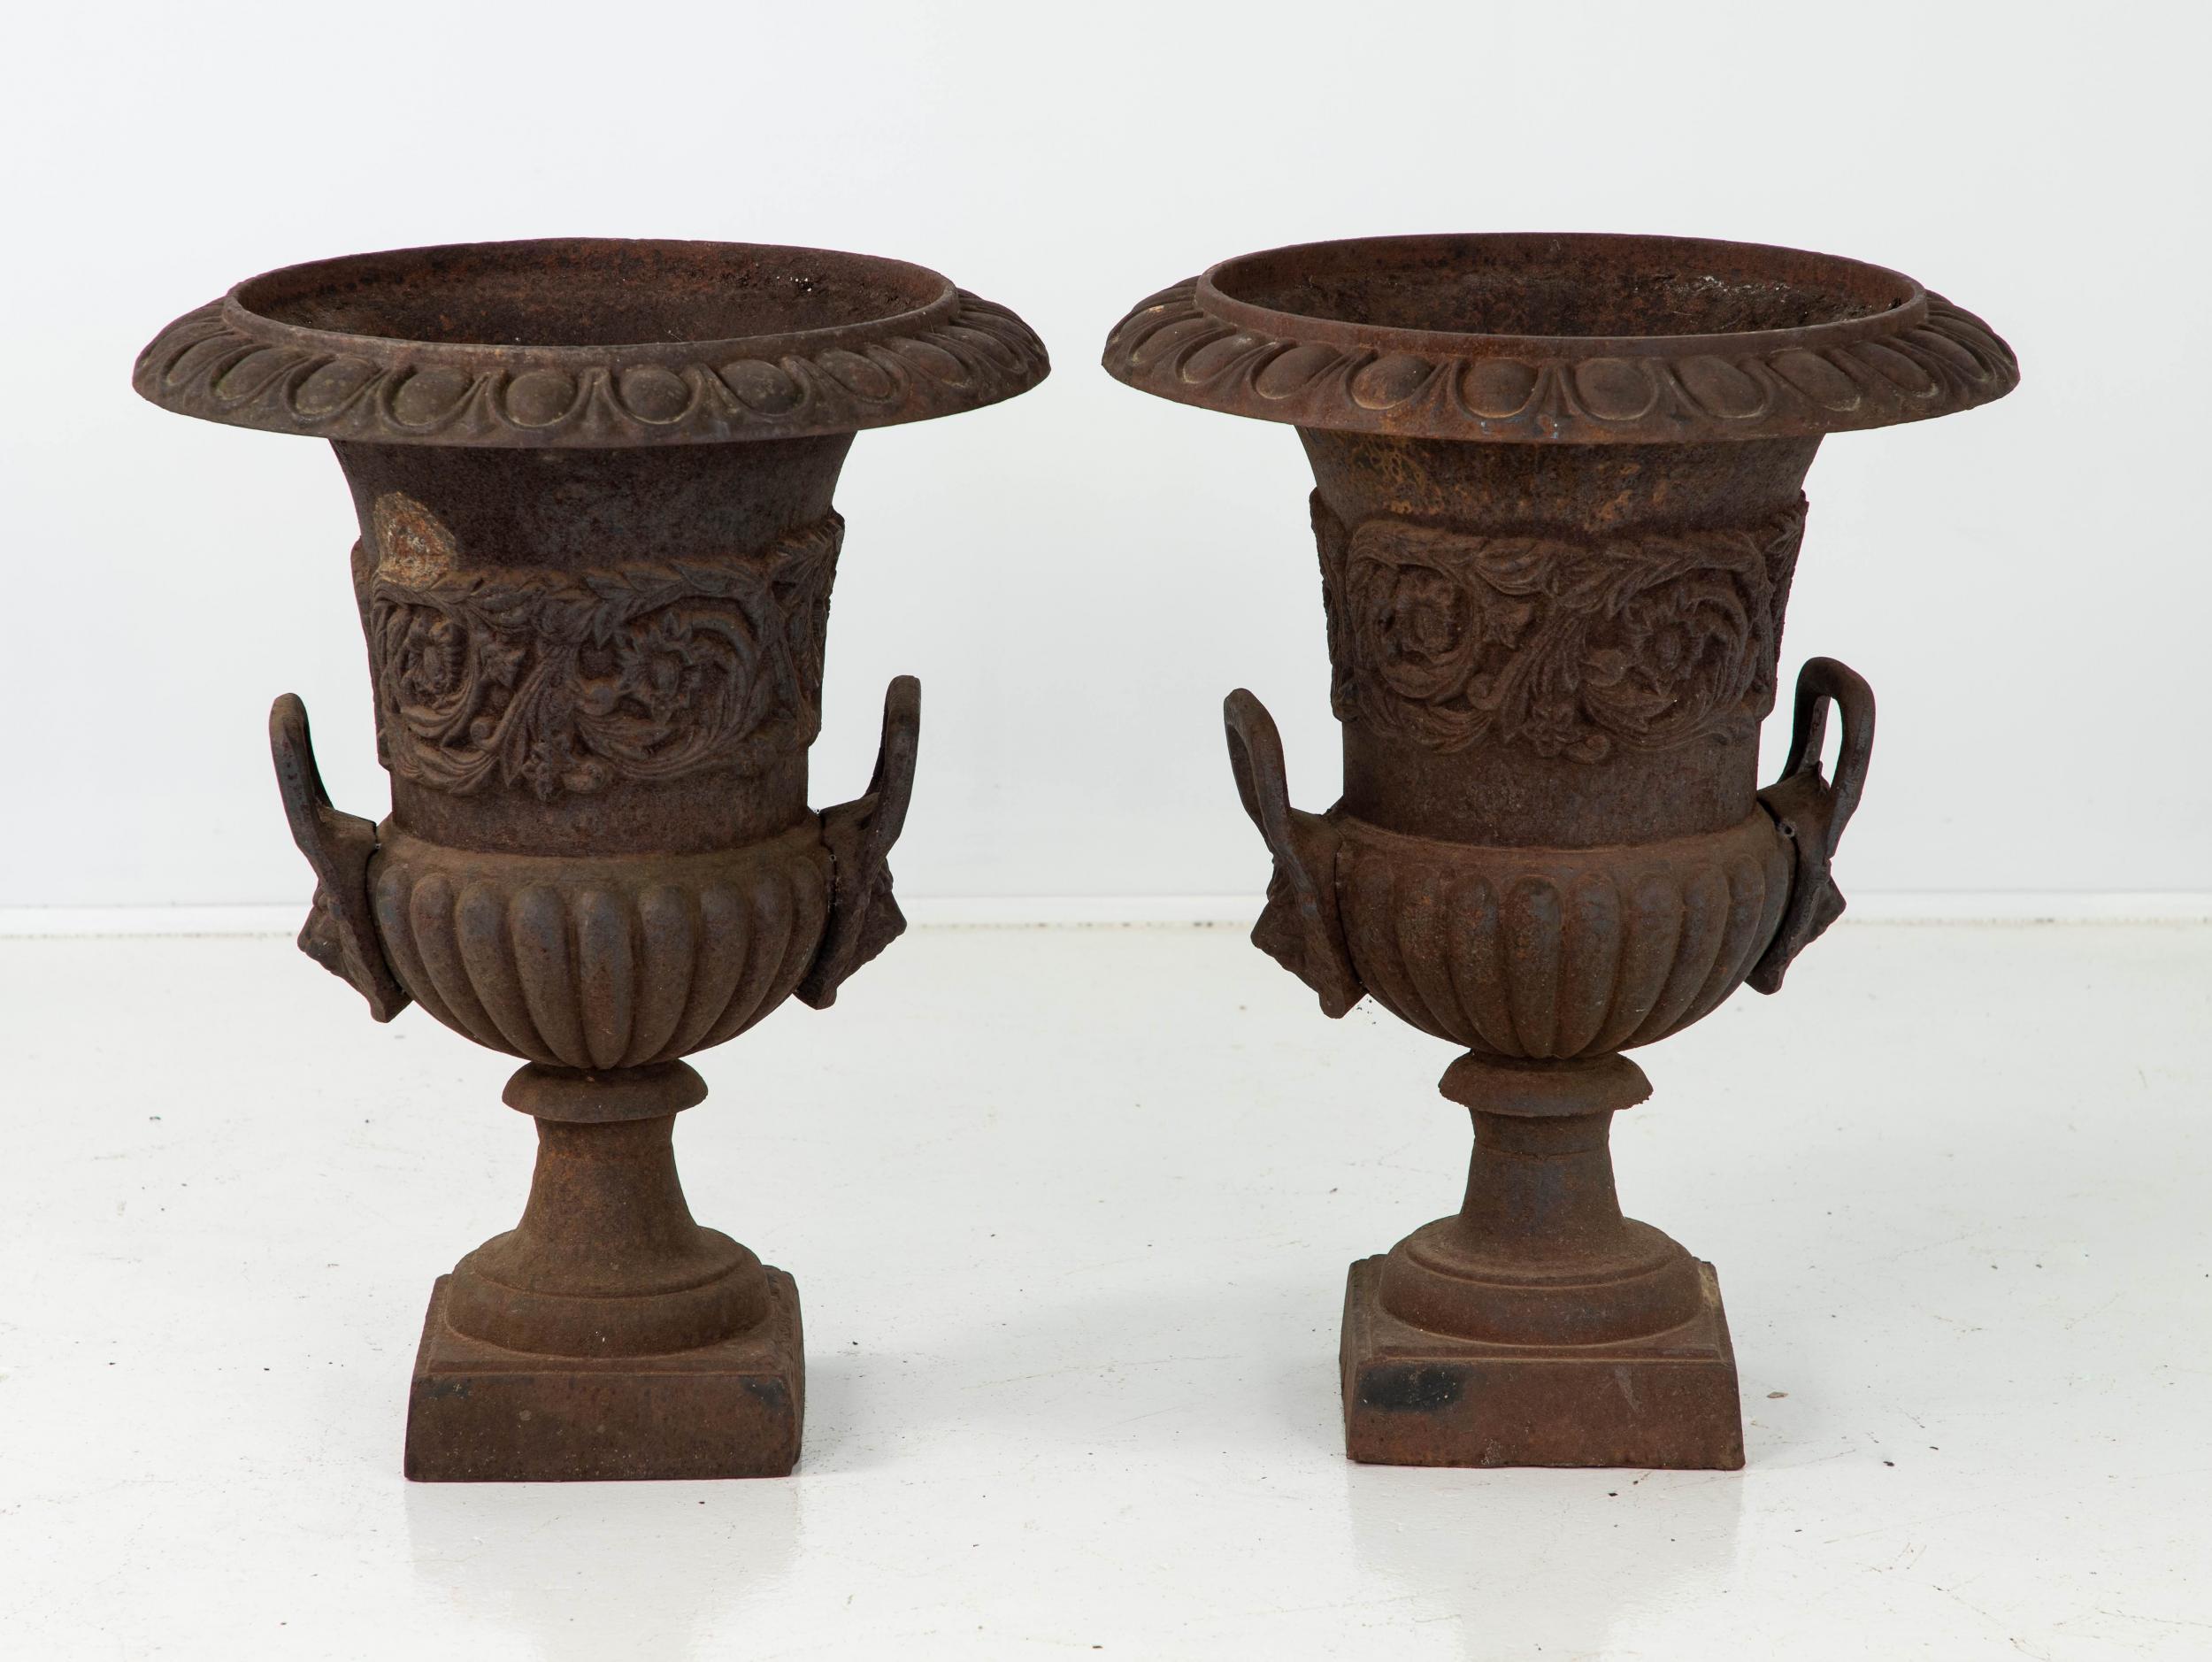 Pair of black painted cast iron urns. This pair features a floral band above the handles and an egg and dart pattern on the top rim. Some paint loss, rust spots, wear consistent with age and use.